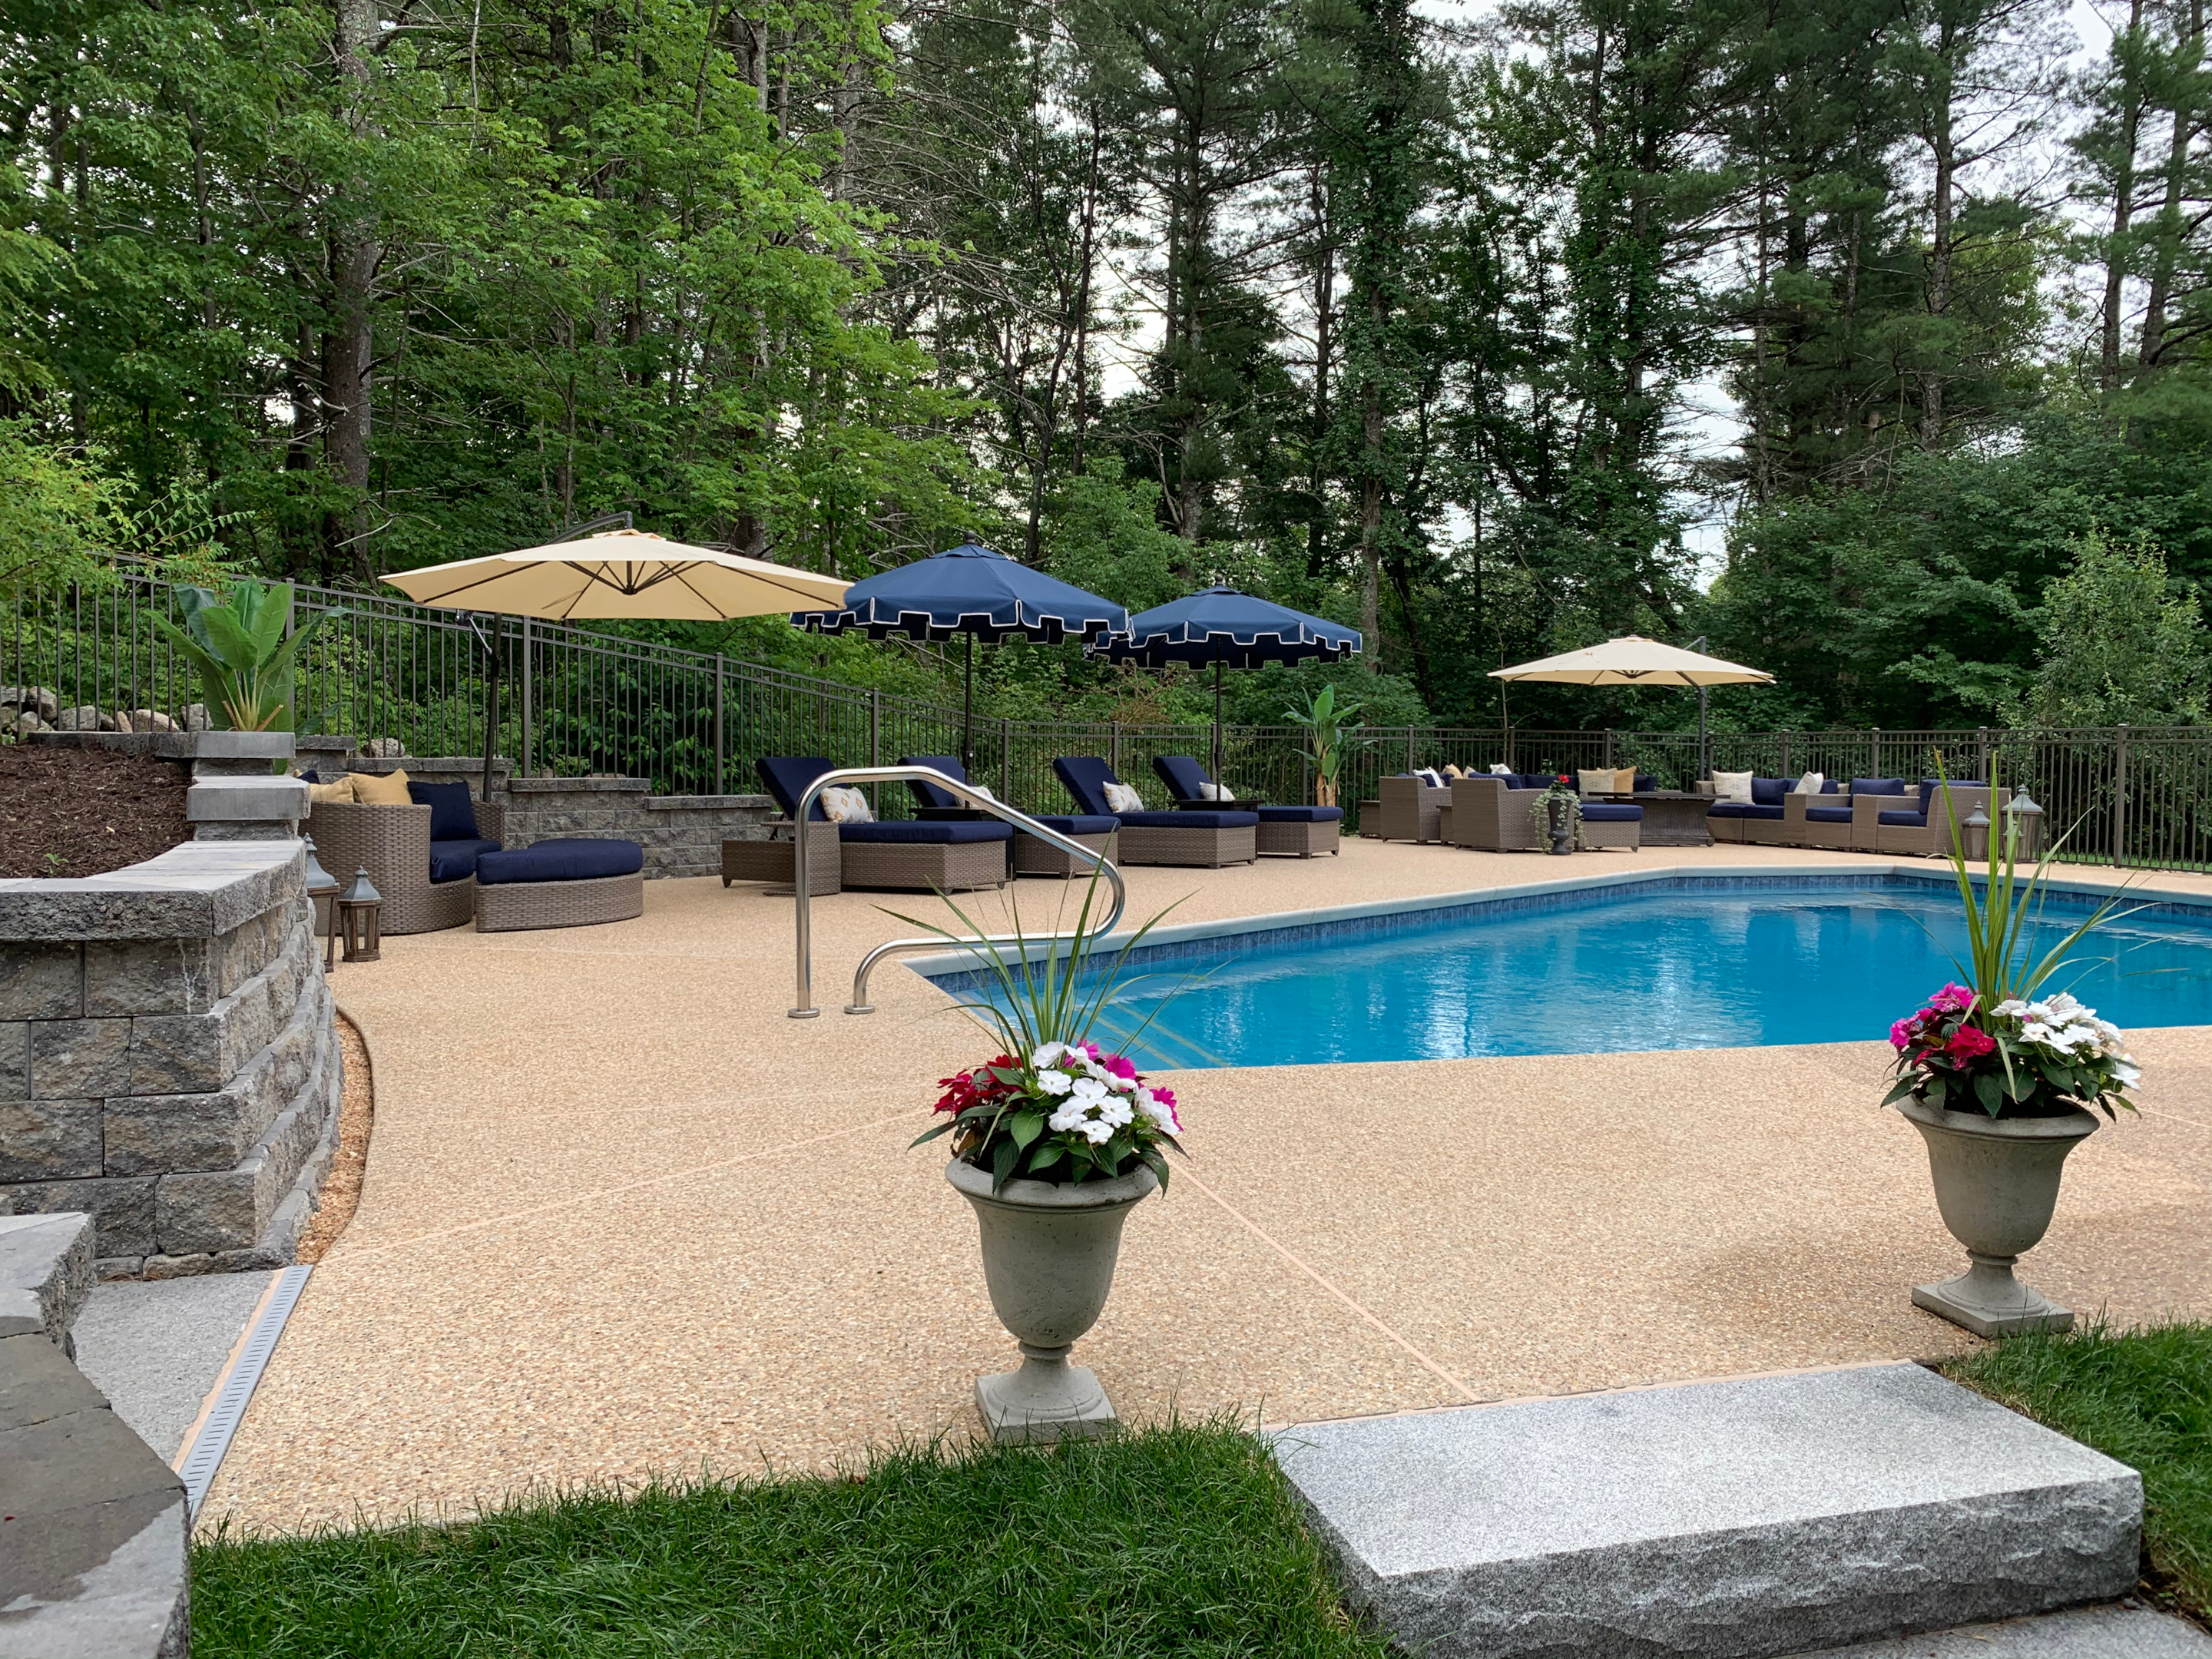 Stamped concrete pool deck resembling natural materials